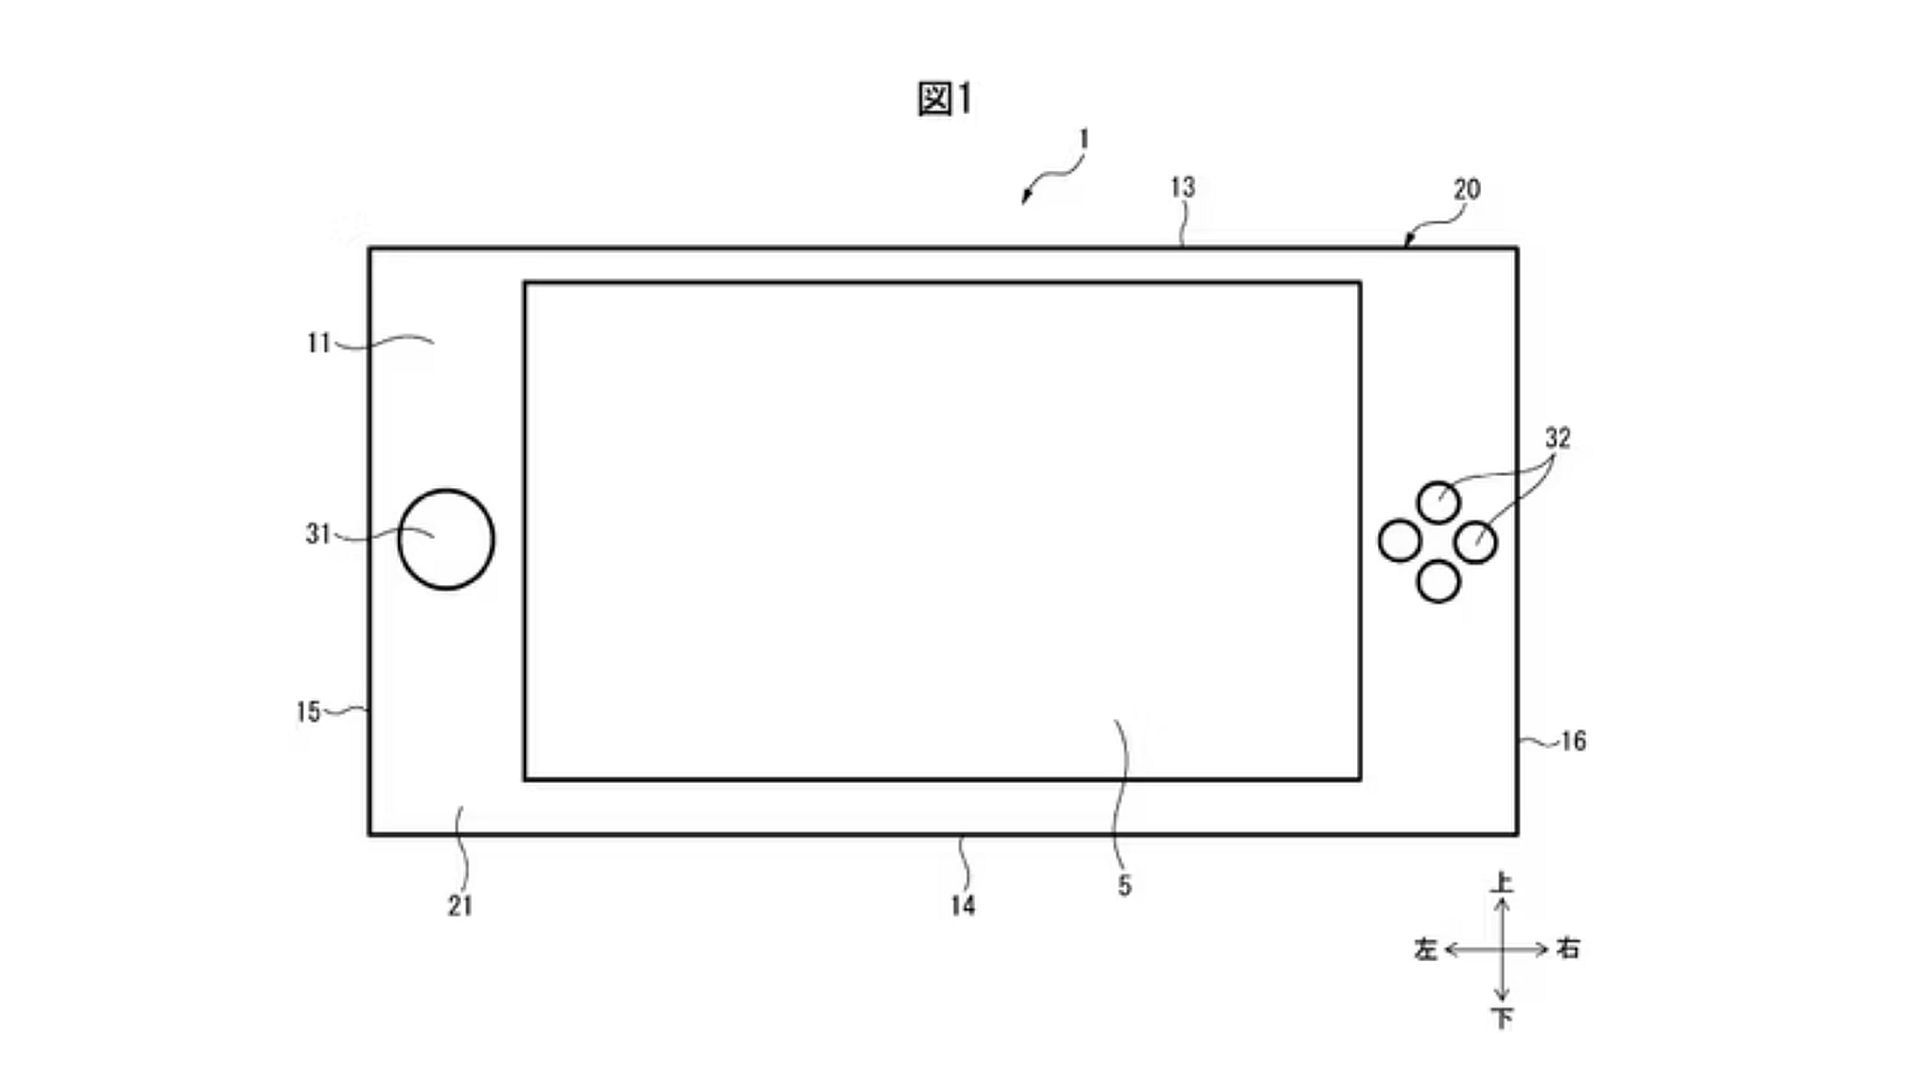 Nintendo Switch 2 patent: A glimpse into exciting changes